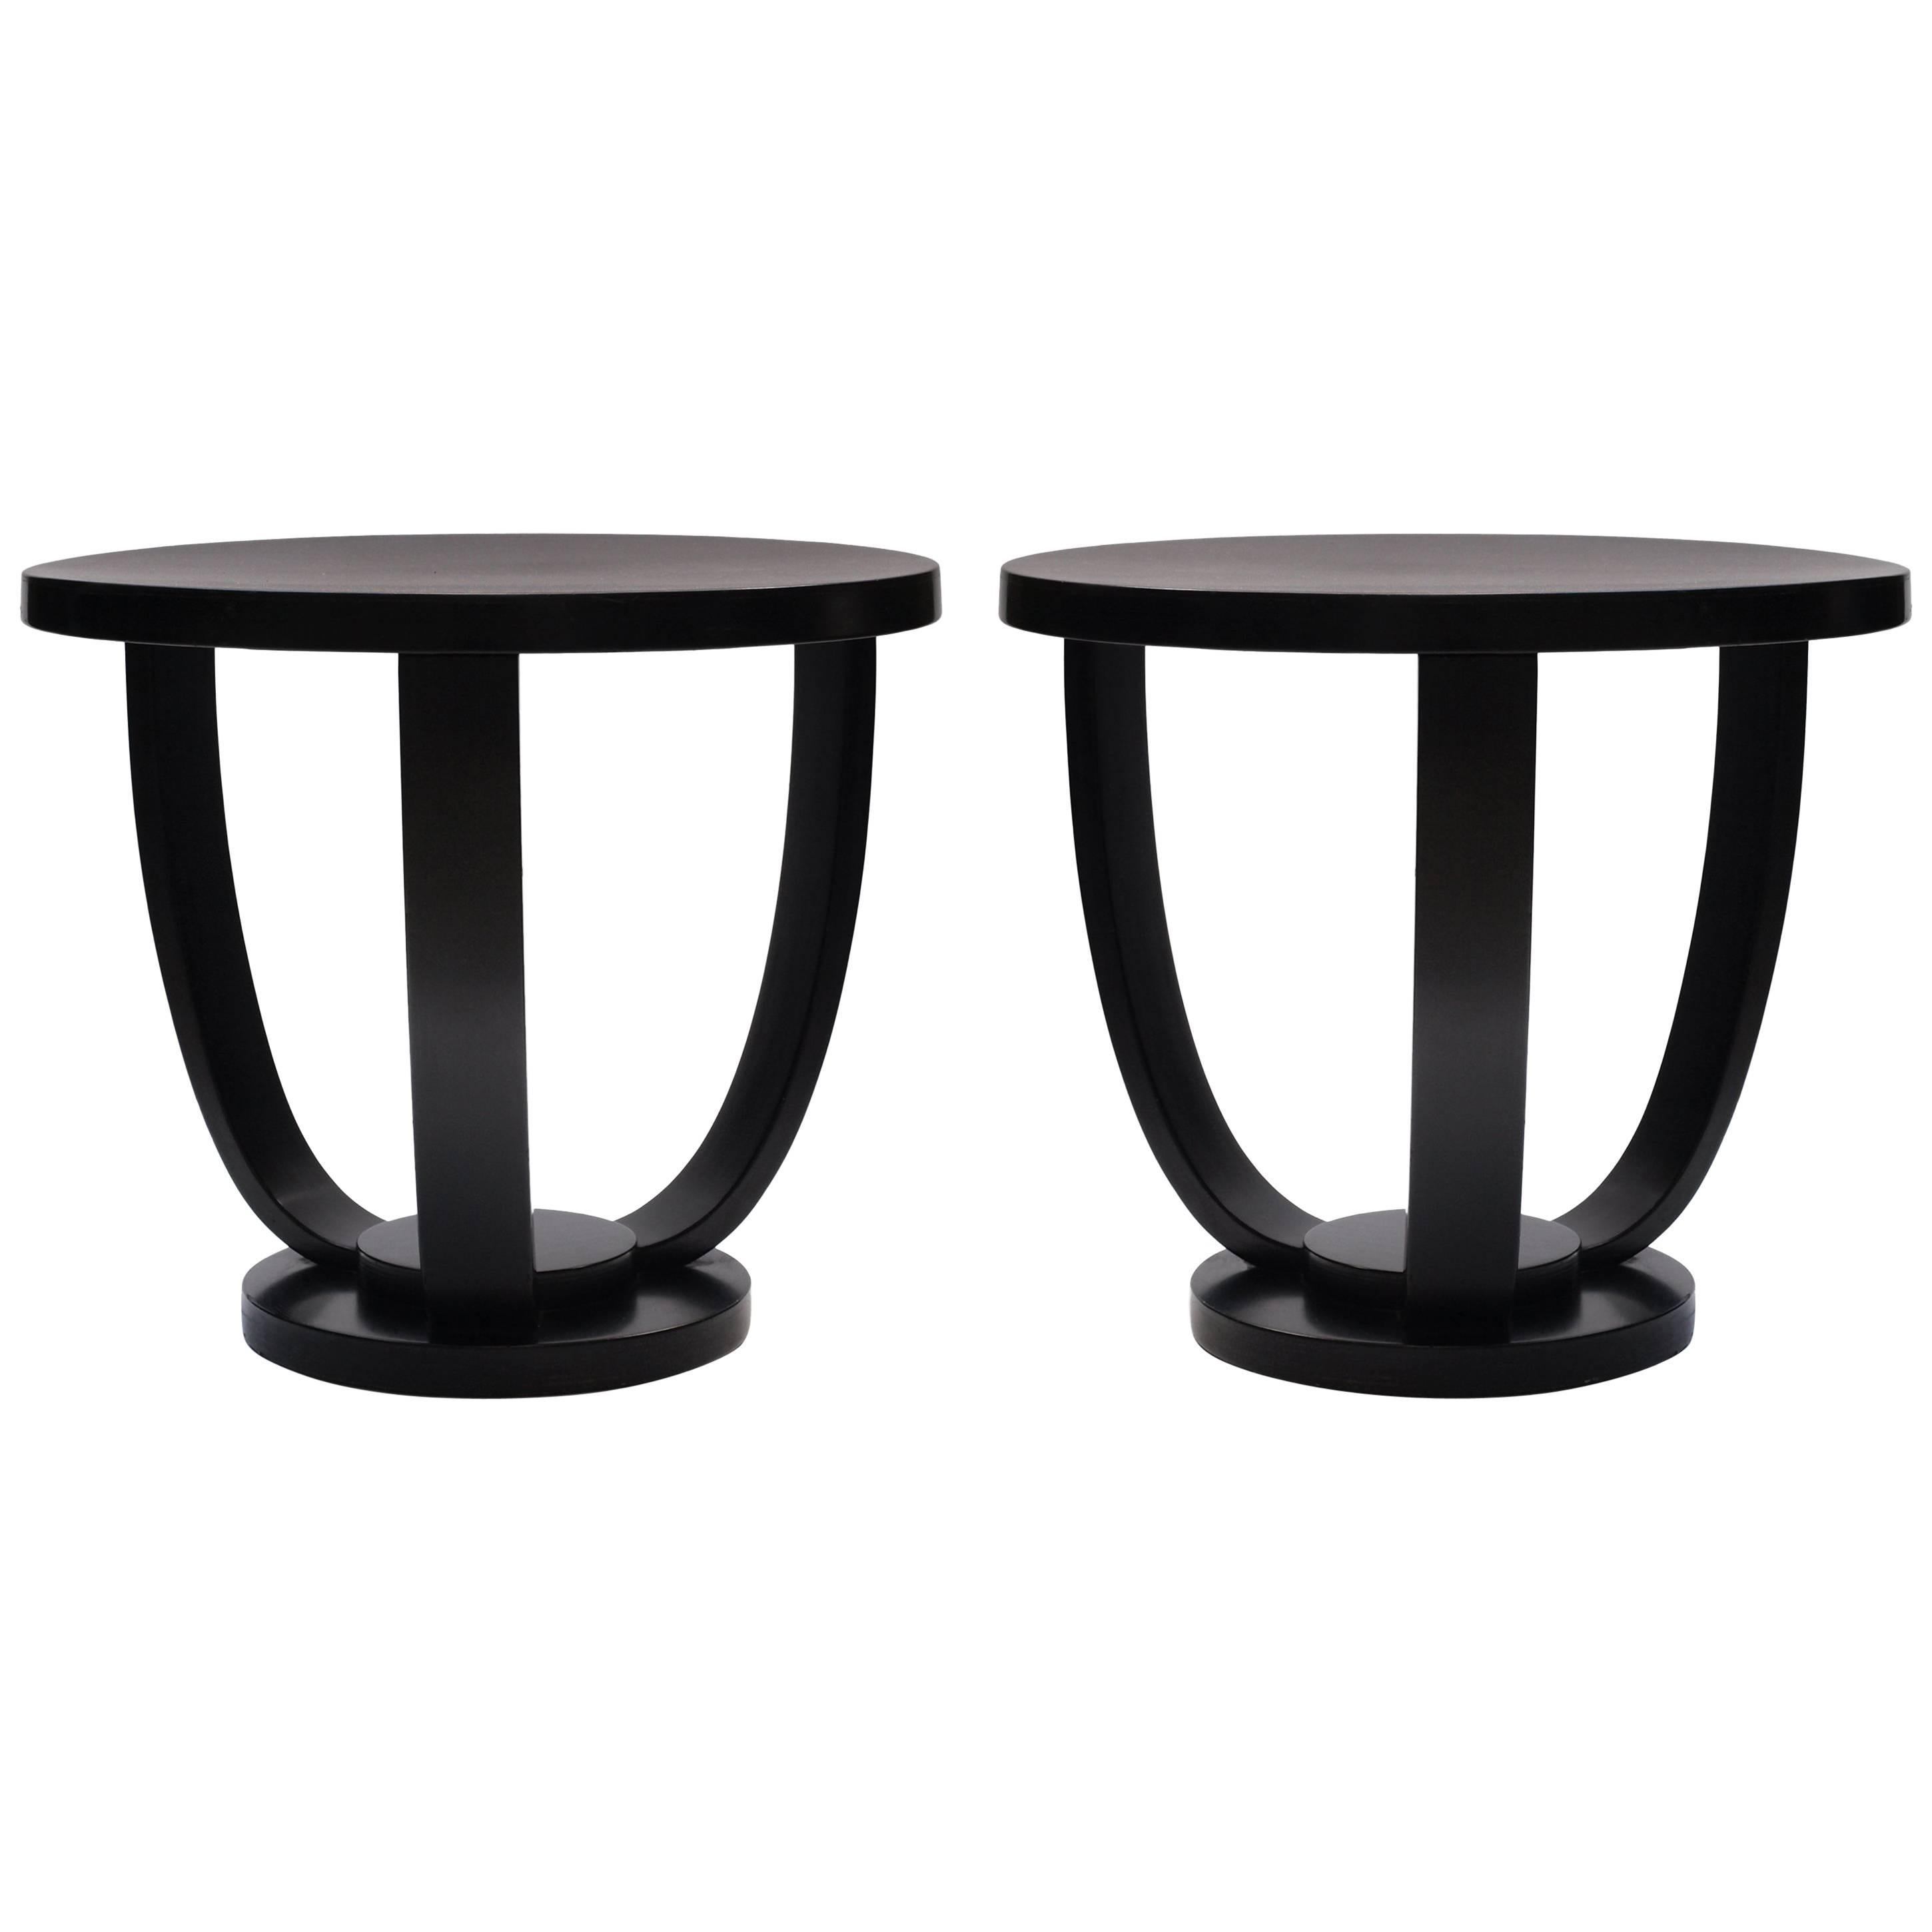 A pair of 1930s black circular bent wood side tables made by Fischel. The three bent wood supports curve up from the sturdy circular base. The wood is finished in a black satin paint. Marked ‘Fischel, Import de Tchecoslovaquie’ with the original